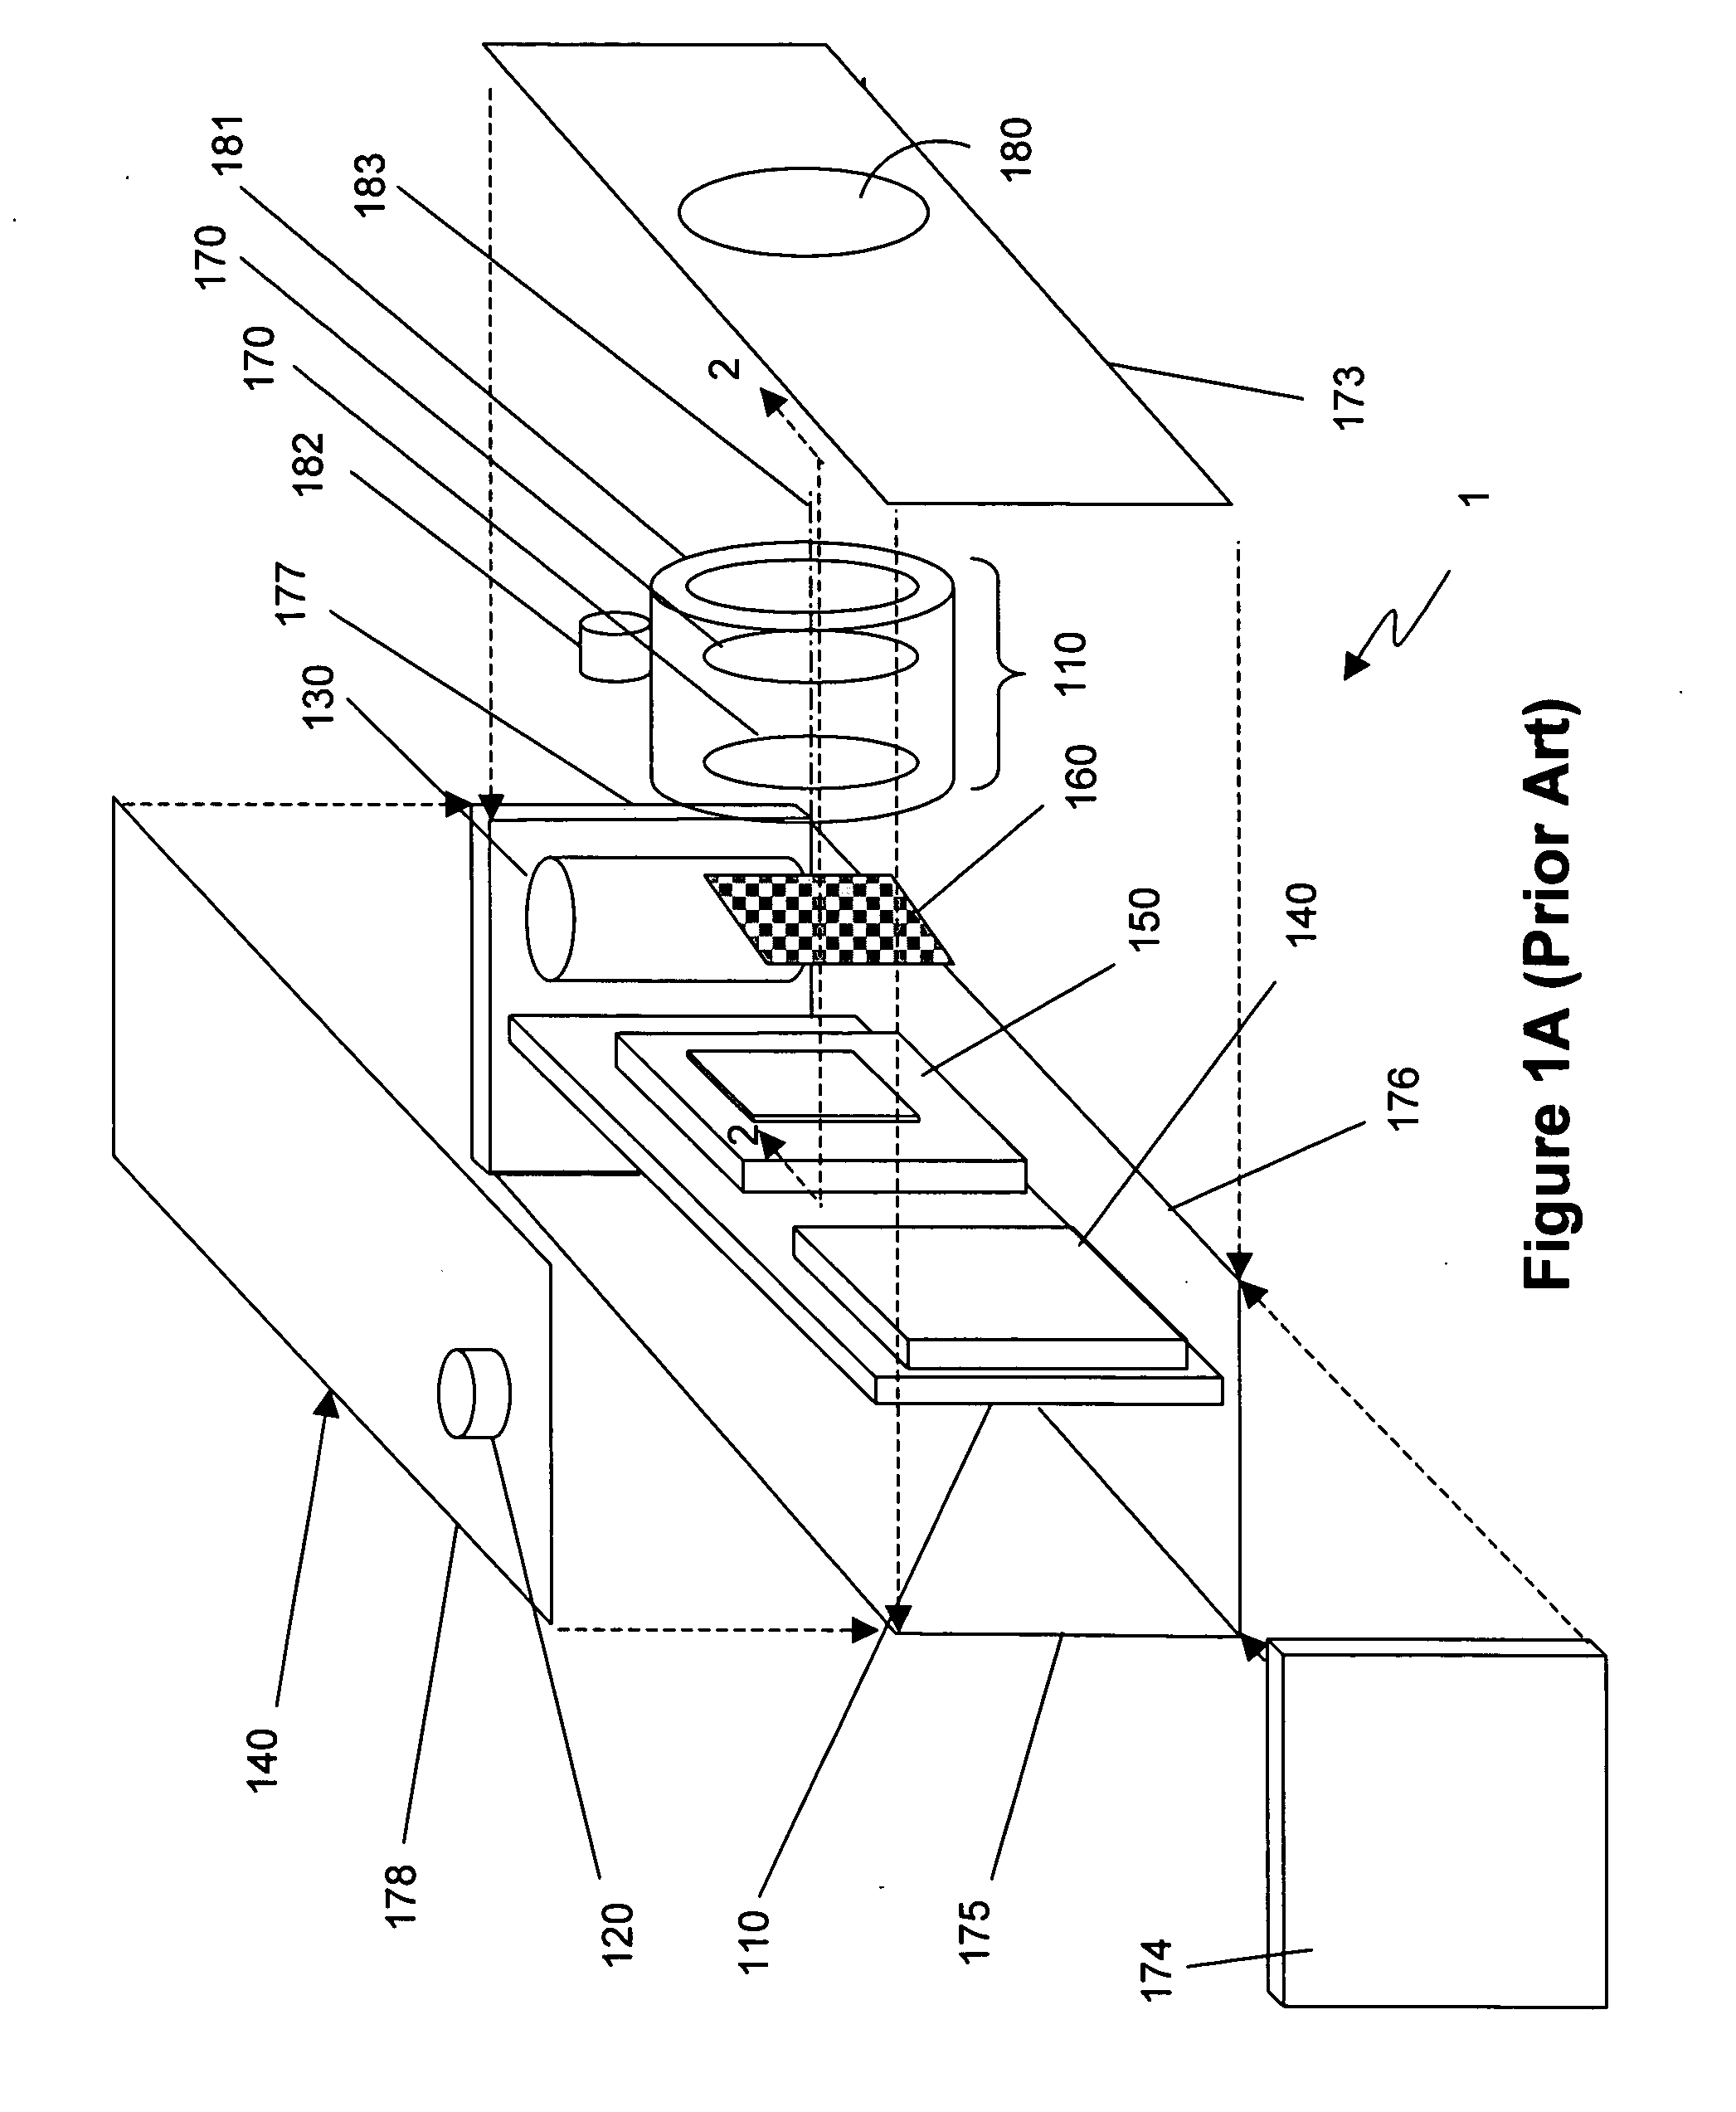 Apparatus for multiple camera devices and method of operating same